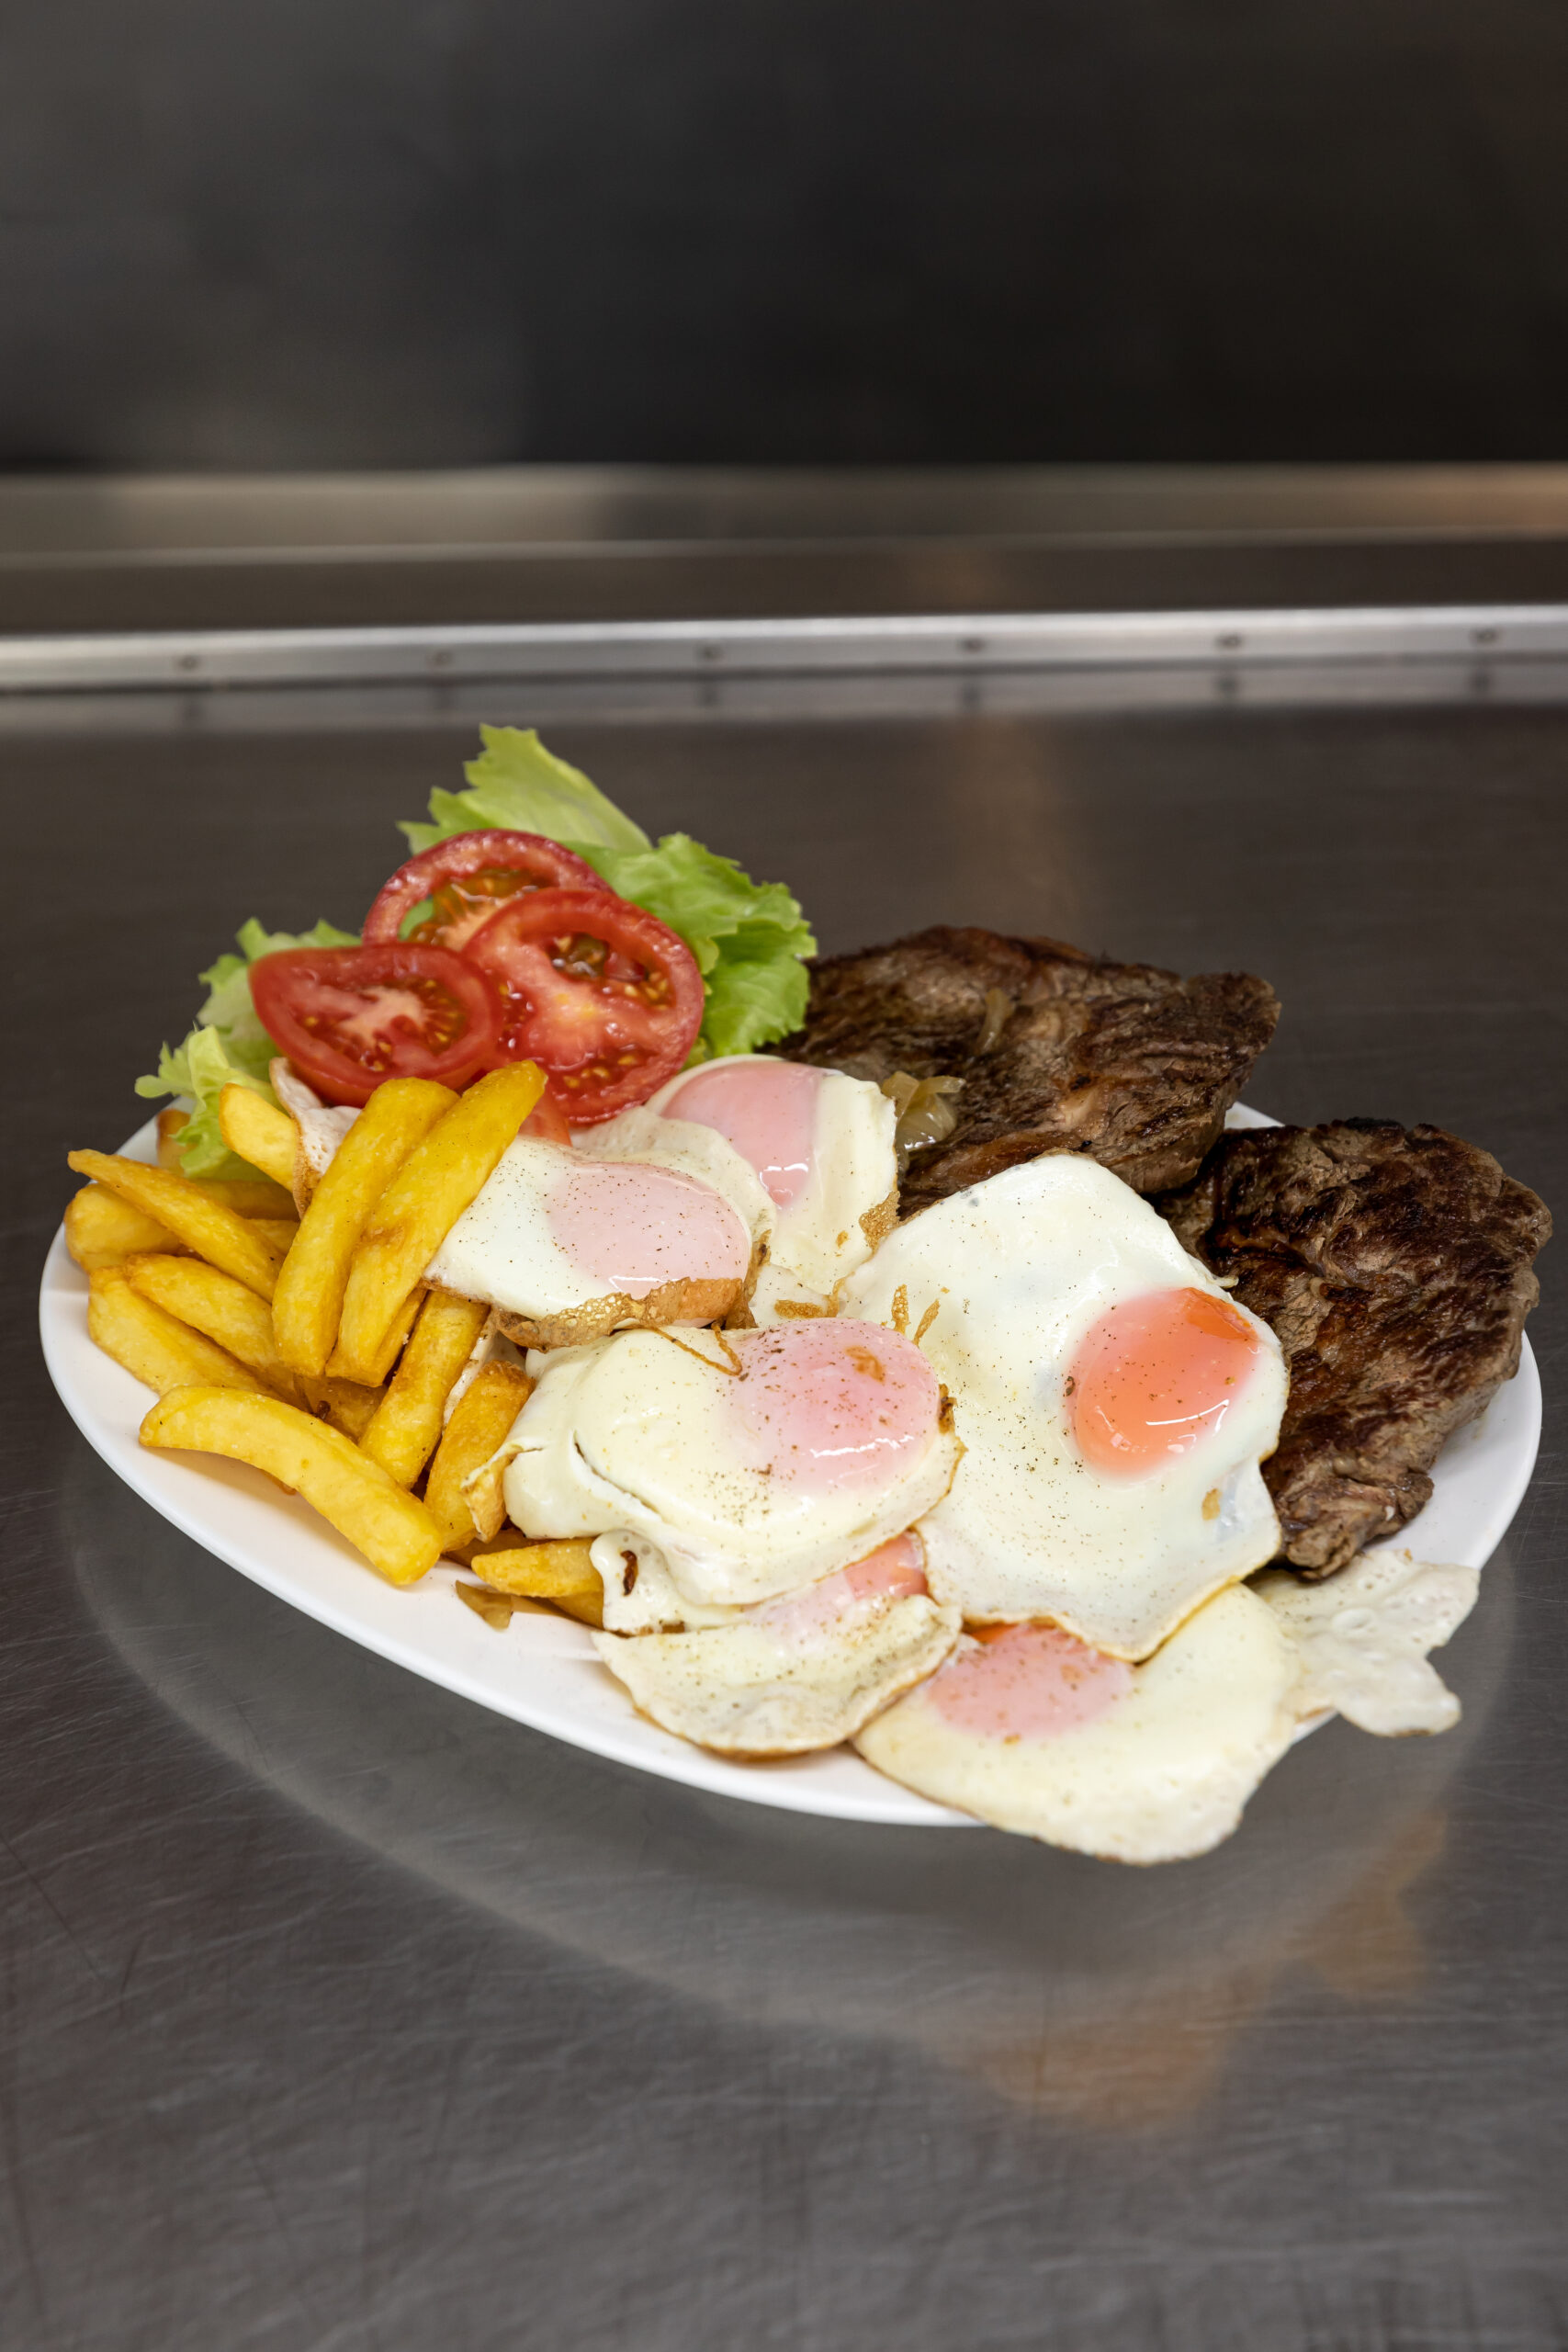 Broadway Challenge from Broadway Diner, eggs, steak, chips and salad